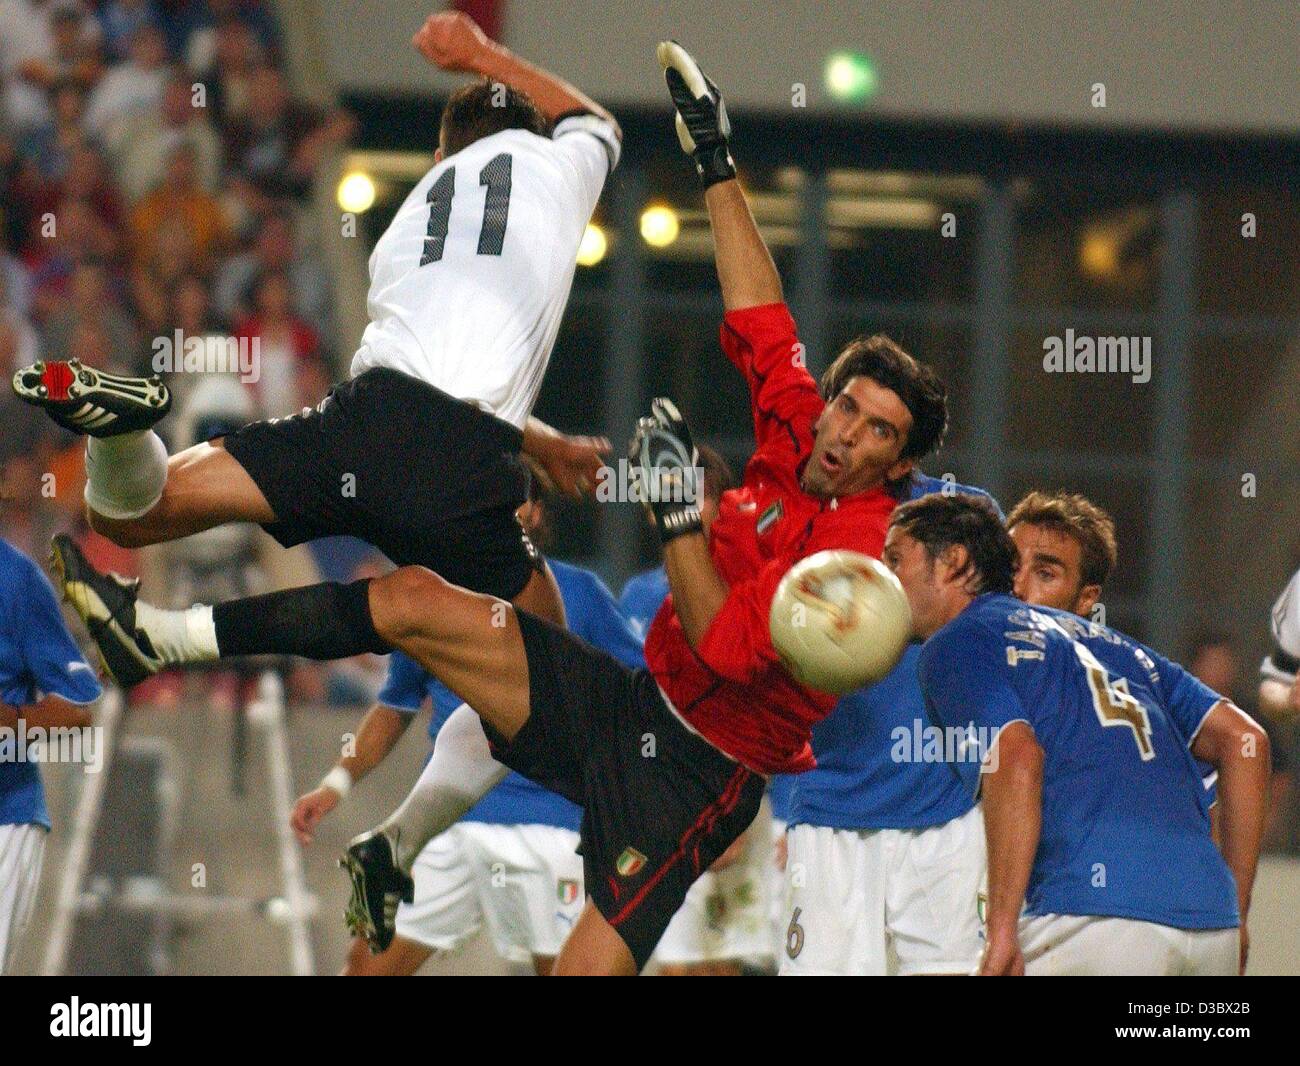 (dpa) - Italian goalkeeper Gianluigi Buffon (C) and his defenders can fend off the danger from Germany's Miroslav Klose (L) in front of Italy's goal during the soccer friendly between Germany and Italy in Stuttgart, Germany, 20 August 2003. Italy wins 1-0. Stock Photo